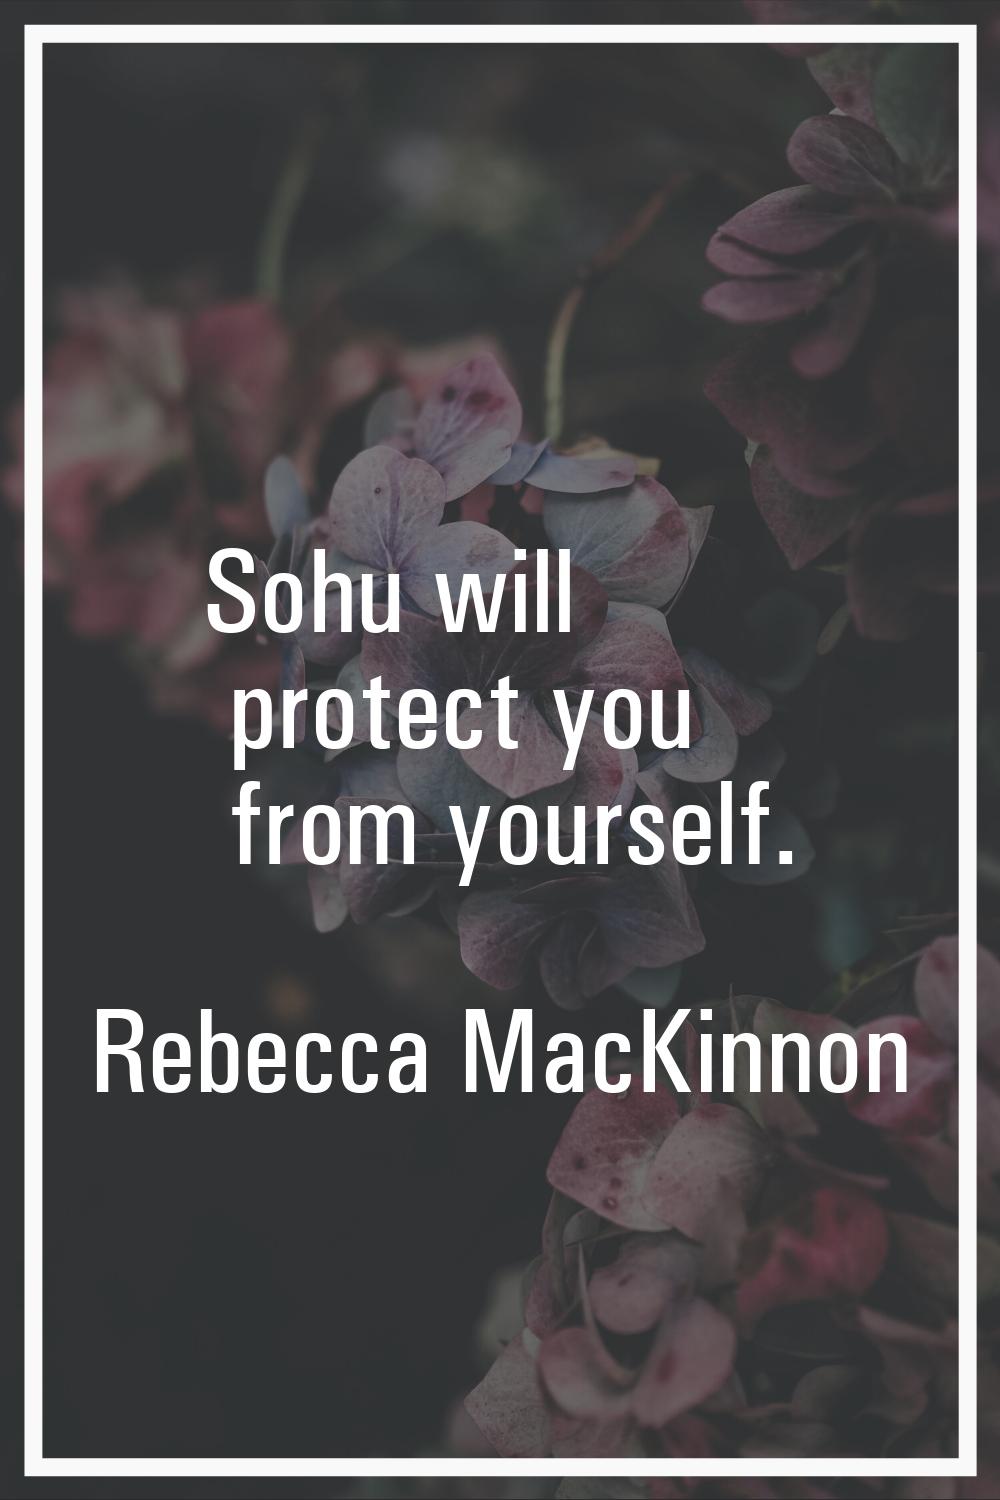 Sohu will protect you from yourself.